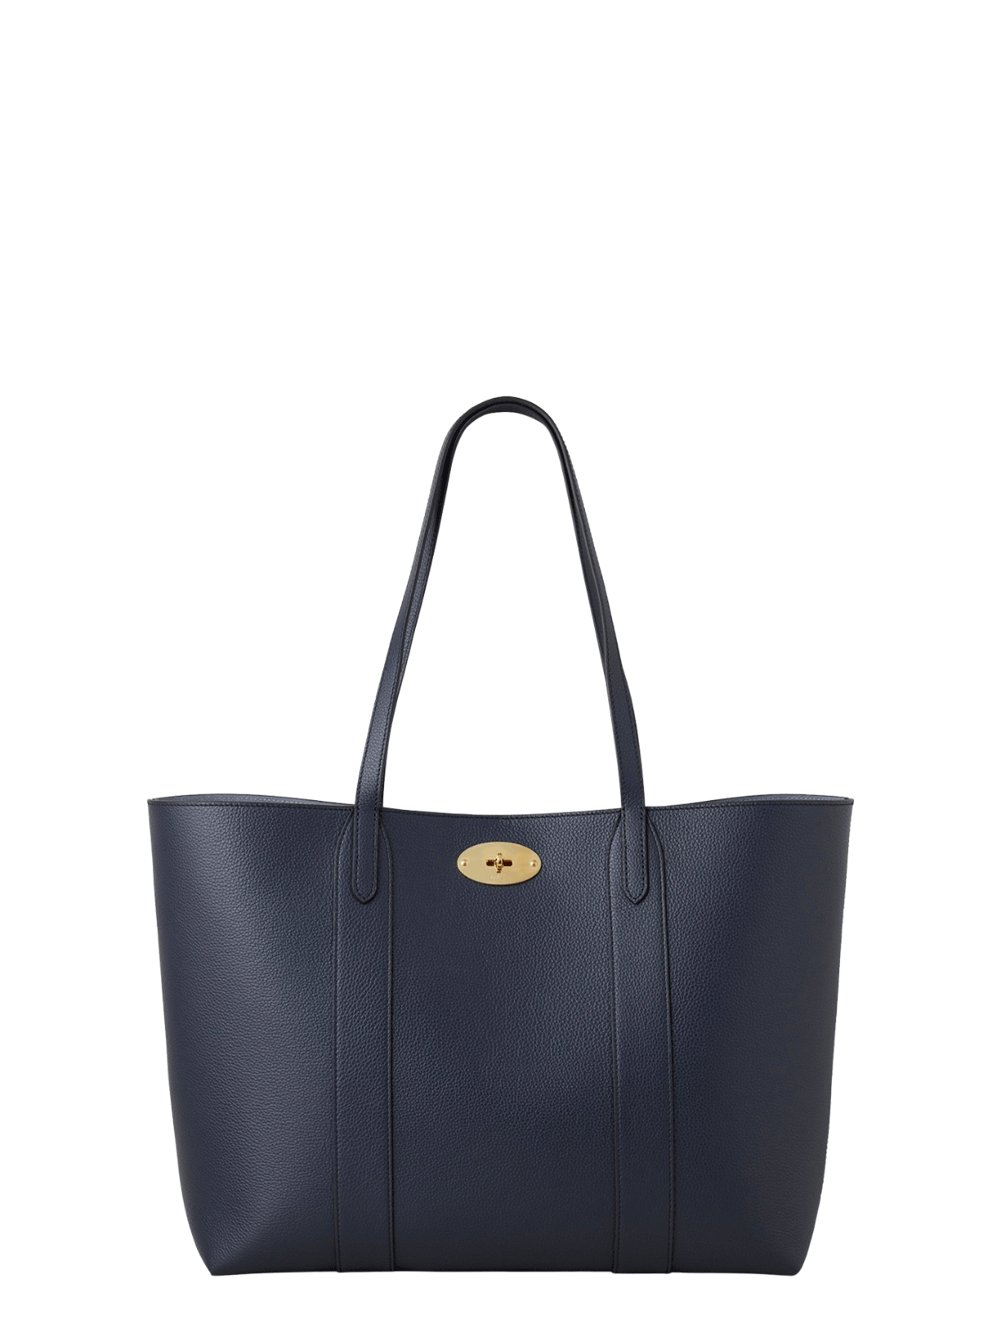 Mulberry-Bayswater-Tote-Night-Sky-&-Poplin-Blue-Small-Classic-Grain-with-Contrast-Night-Sky-1